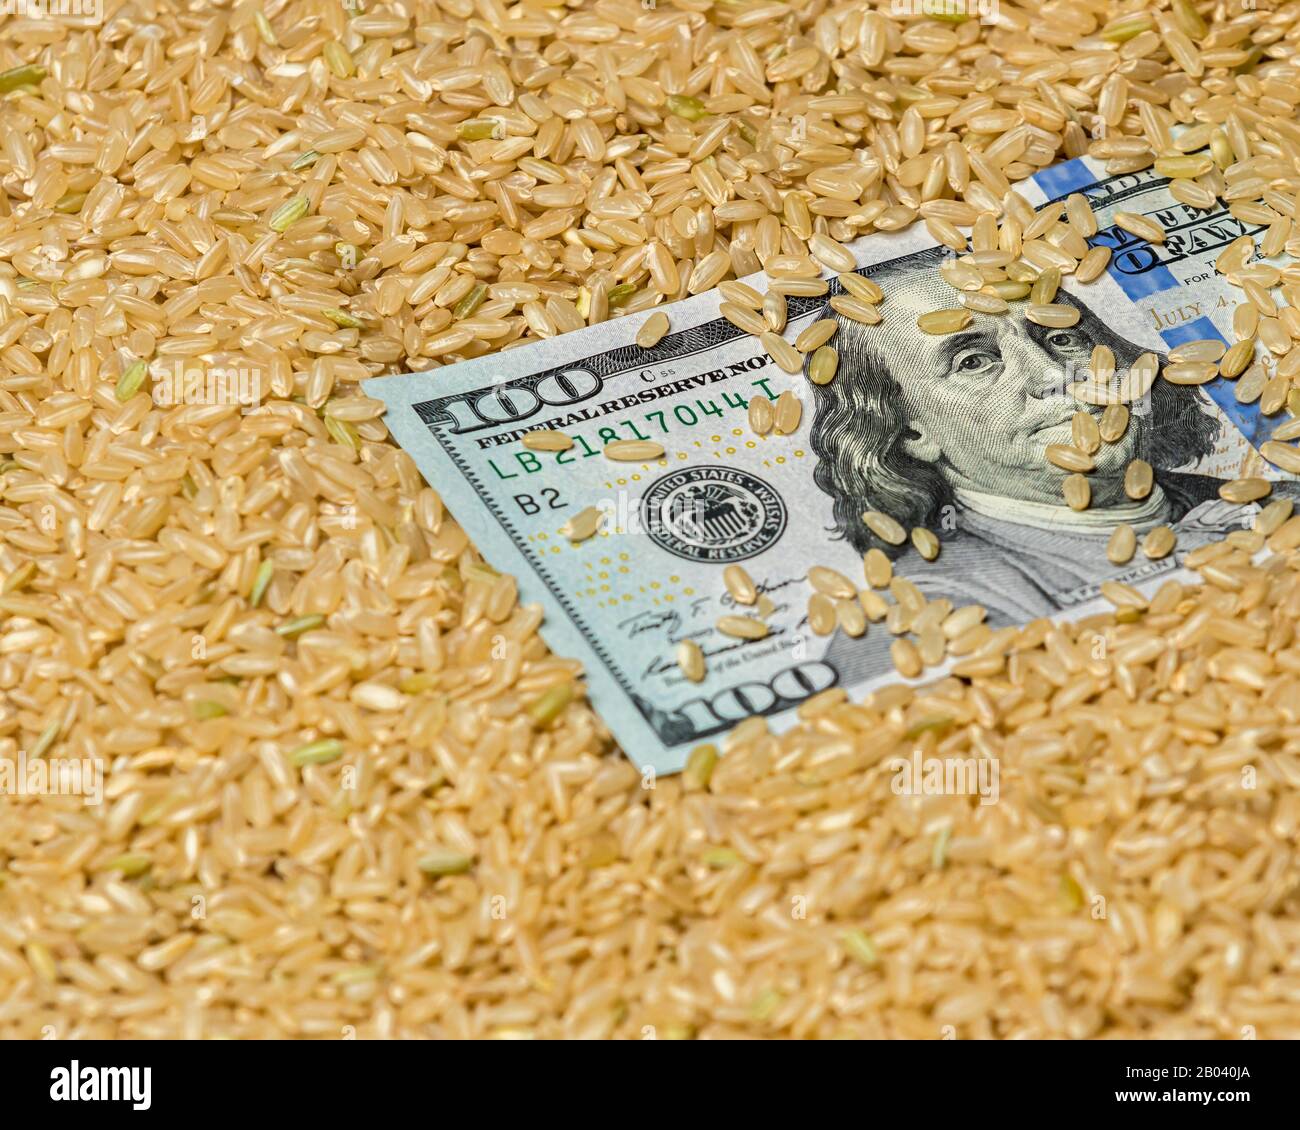 Closeup of brown whole grain rice seed surrounding American 100 dollar bill. Concept of United States of America rice industry, trade, market price Stock Photo